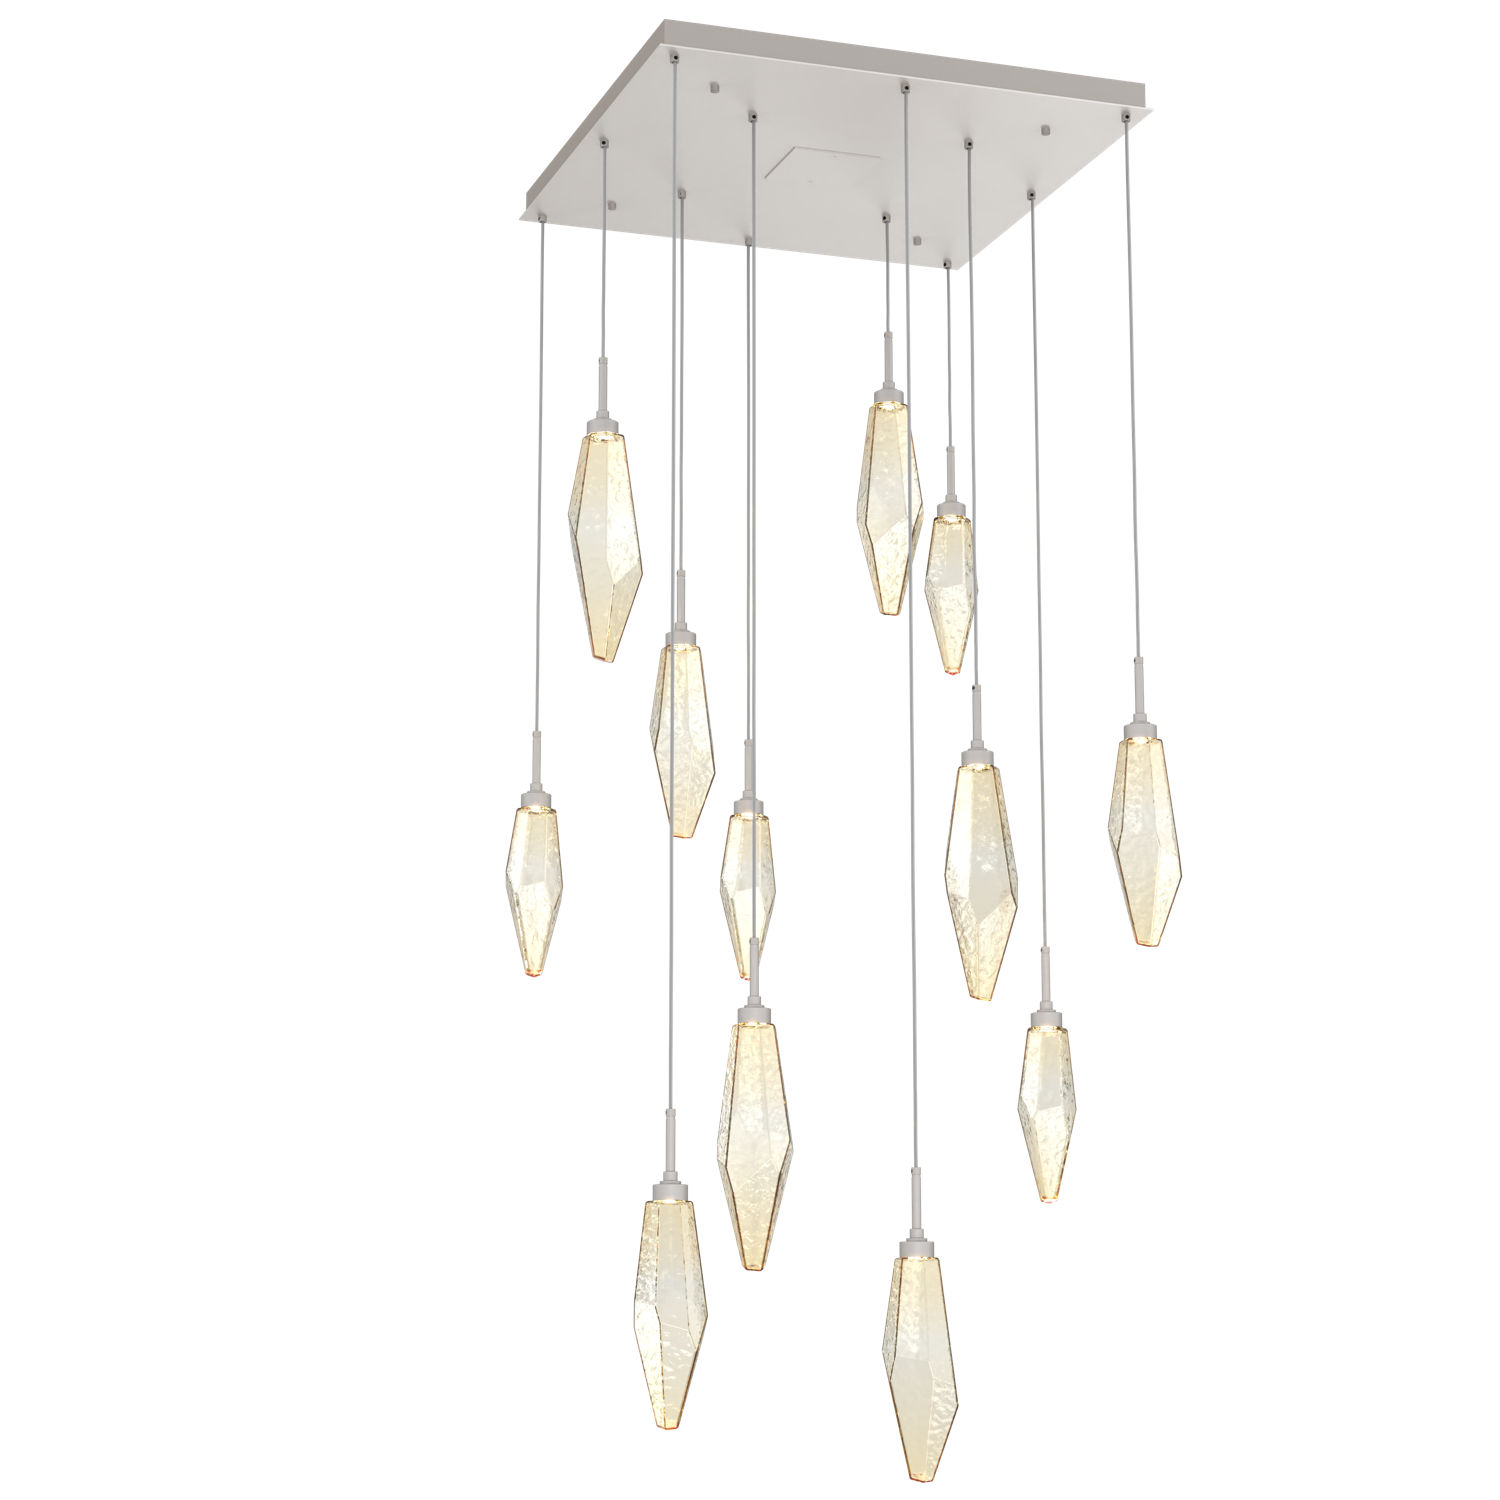 CHB0050-12-BS-CA-Hammerton-Studio-Rock-Crystal-12-light-square-pendant-chandelier-with-beige-silver-finish-and-chilled-amber-blown-glass-shades-and-LED-lamping